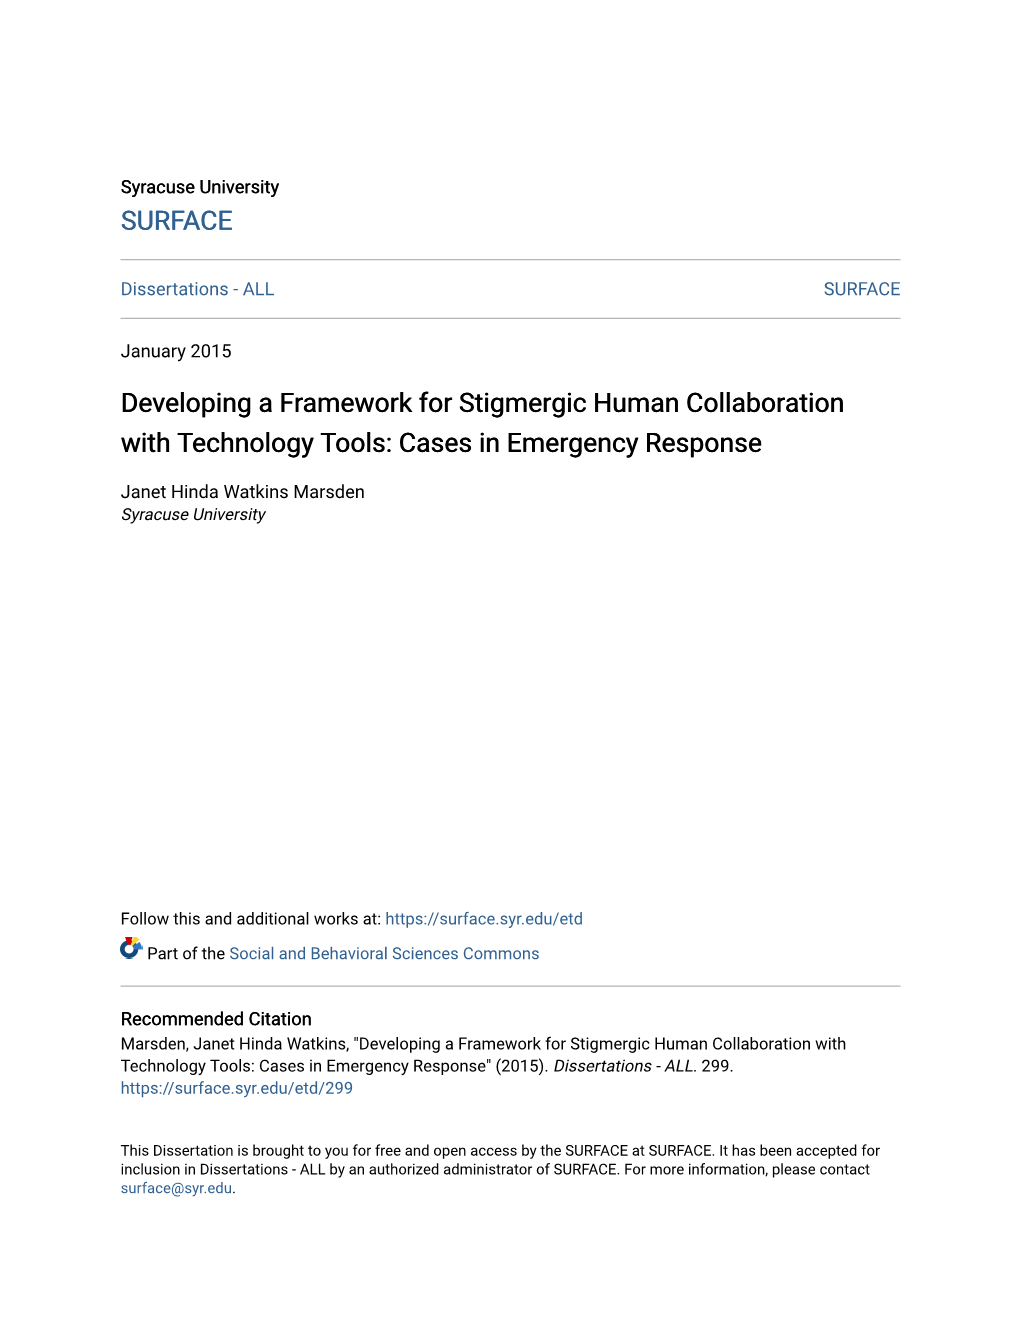 Developing a Framework for Stigmergic Human Collaboration with Technology Tools: Cases in Emergency Response